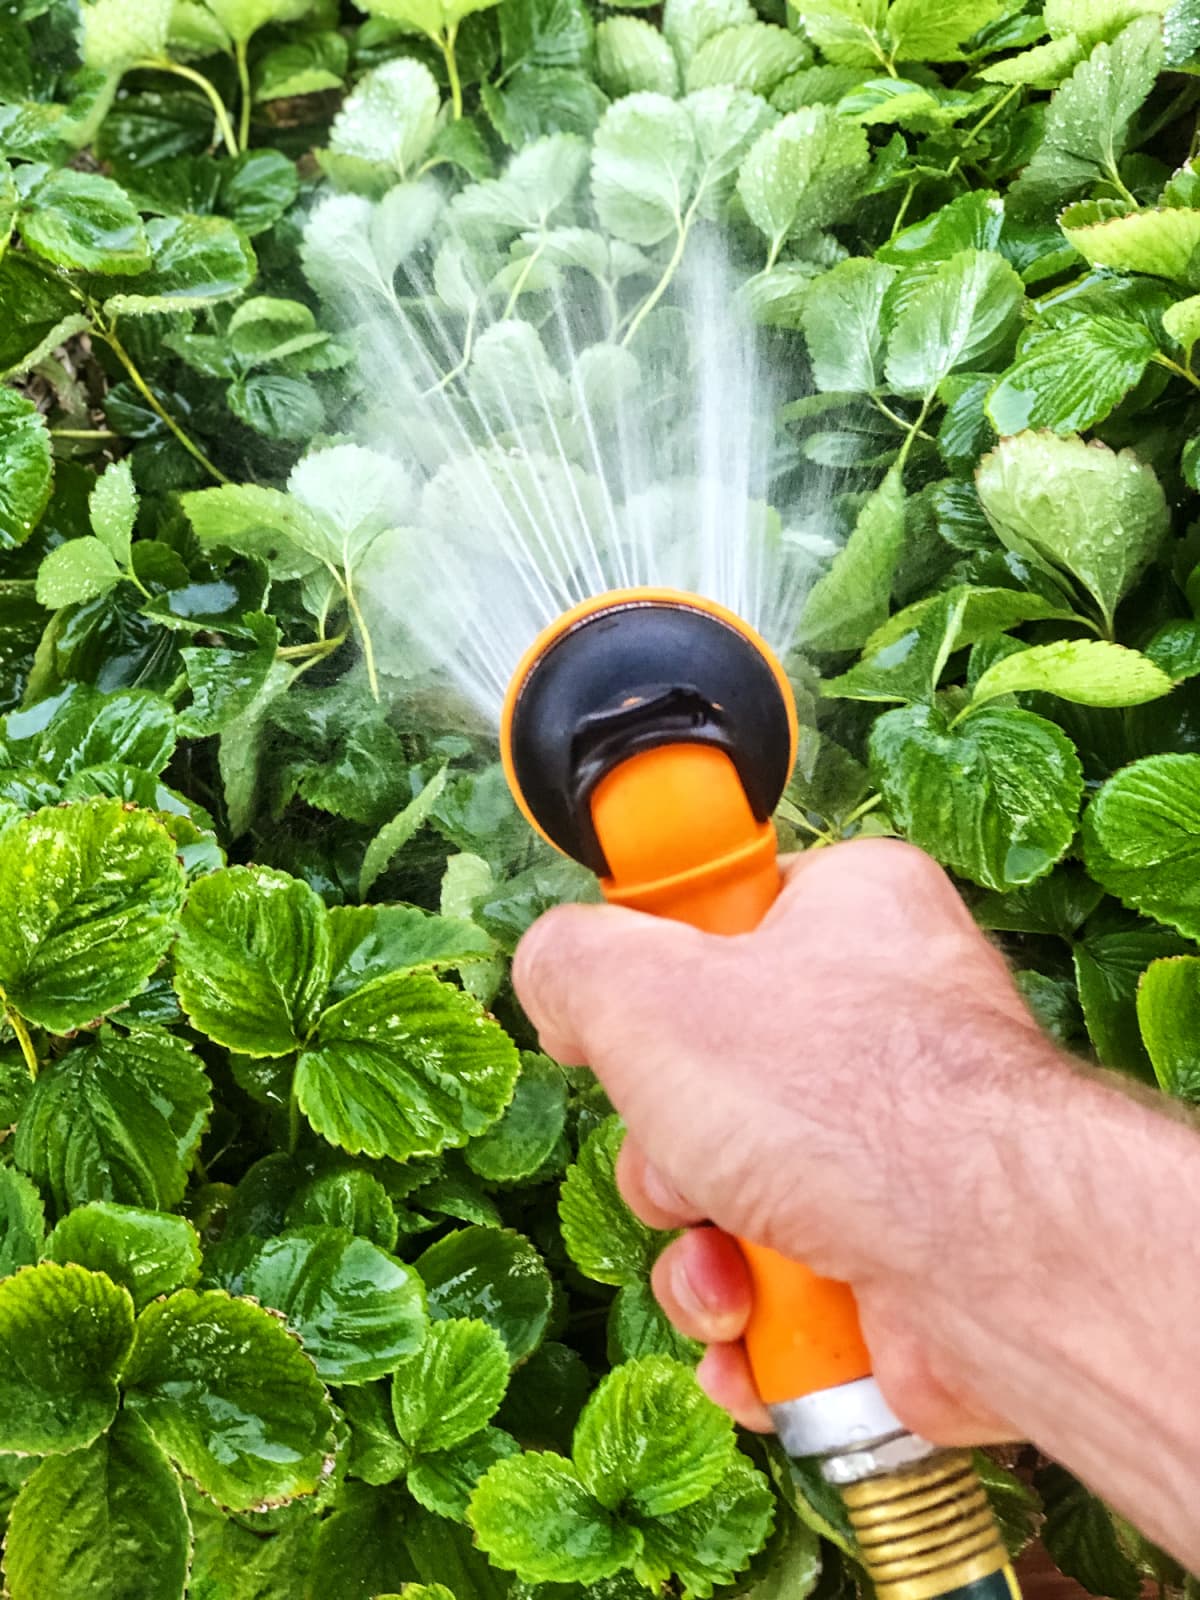 A water hose spraying strawberry plants